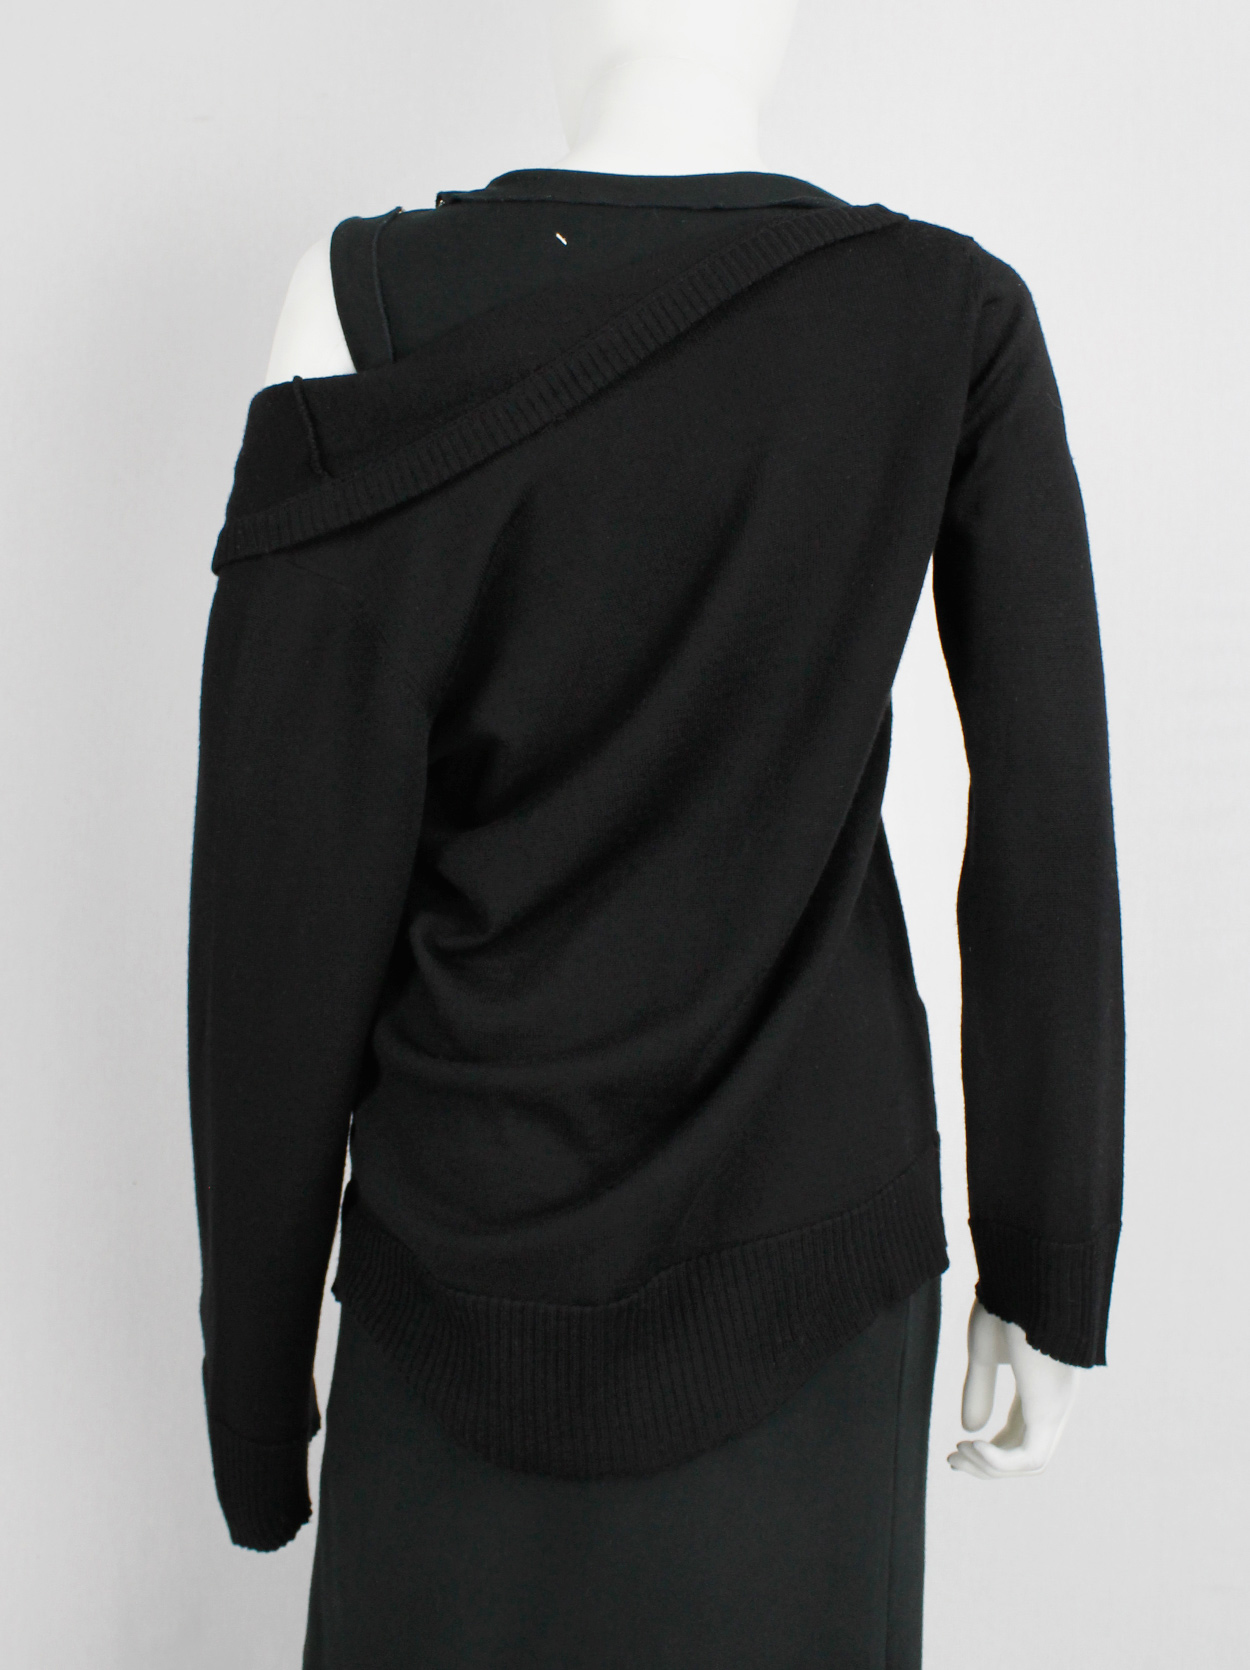 Maison Martin Margiela black stretched out cardigan falling off the ...